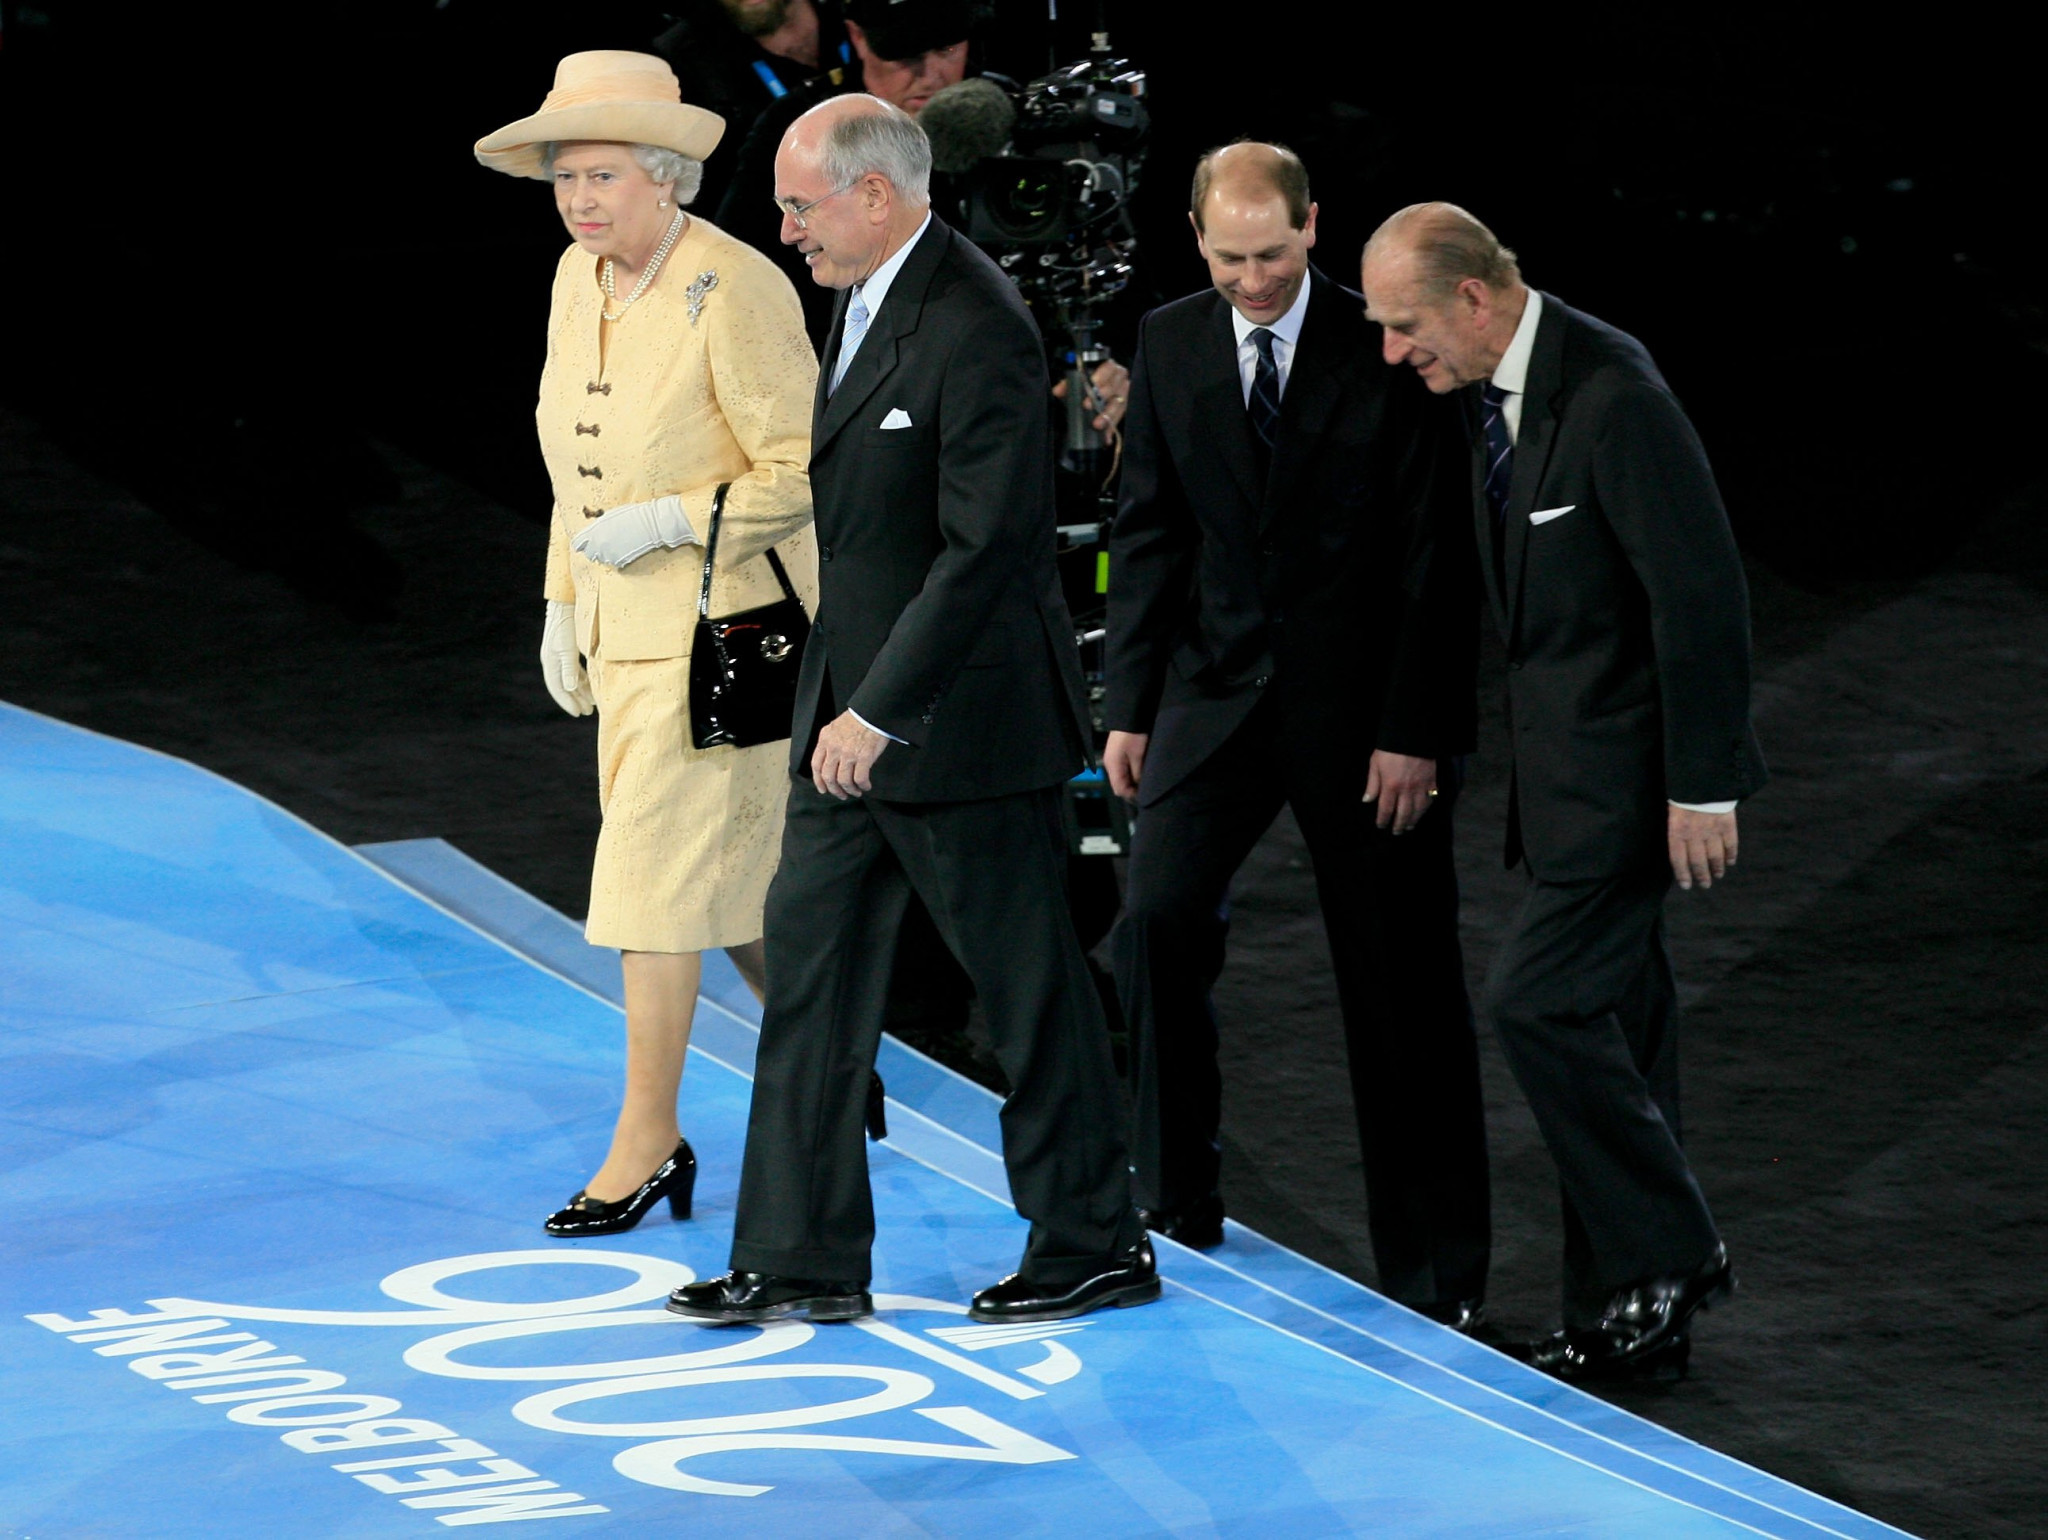 Australian Prime Minister accompanied the Queen at the Opening Ceremony of the 2006 Commonwealth Games in Melbourne ©Getty Images